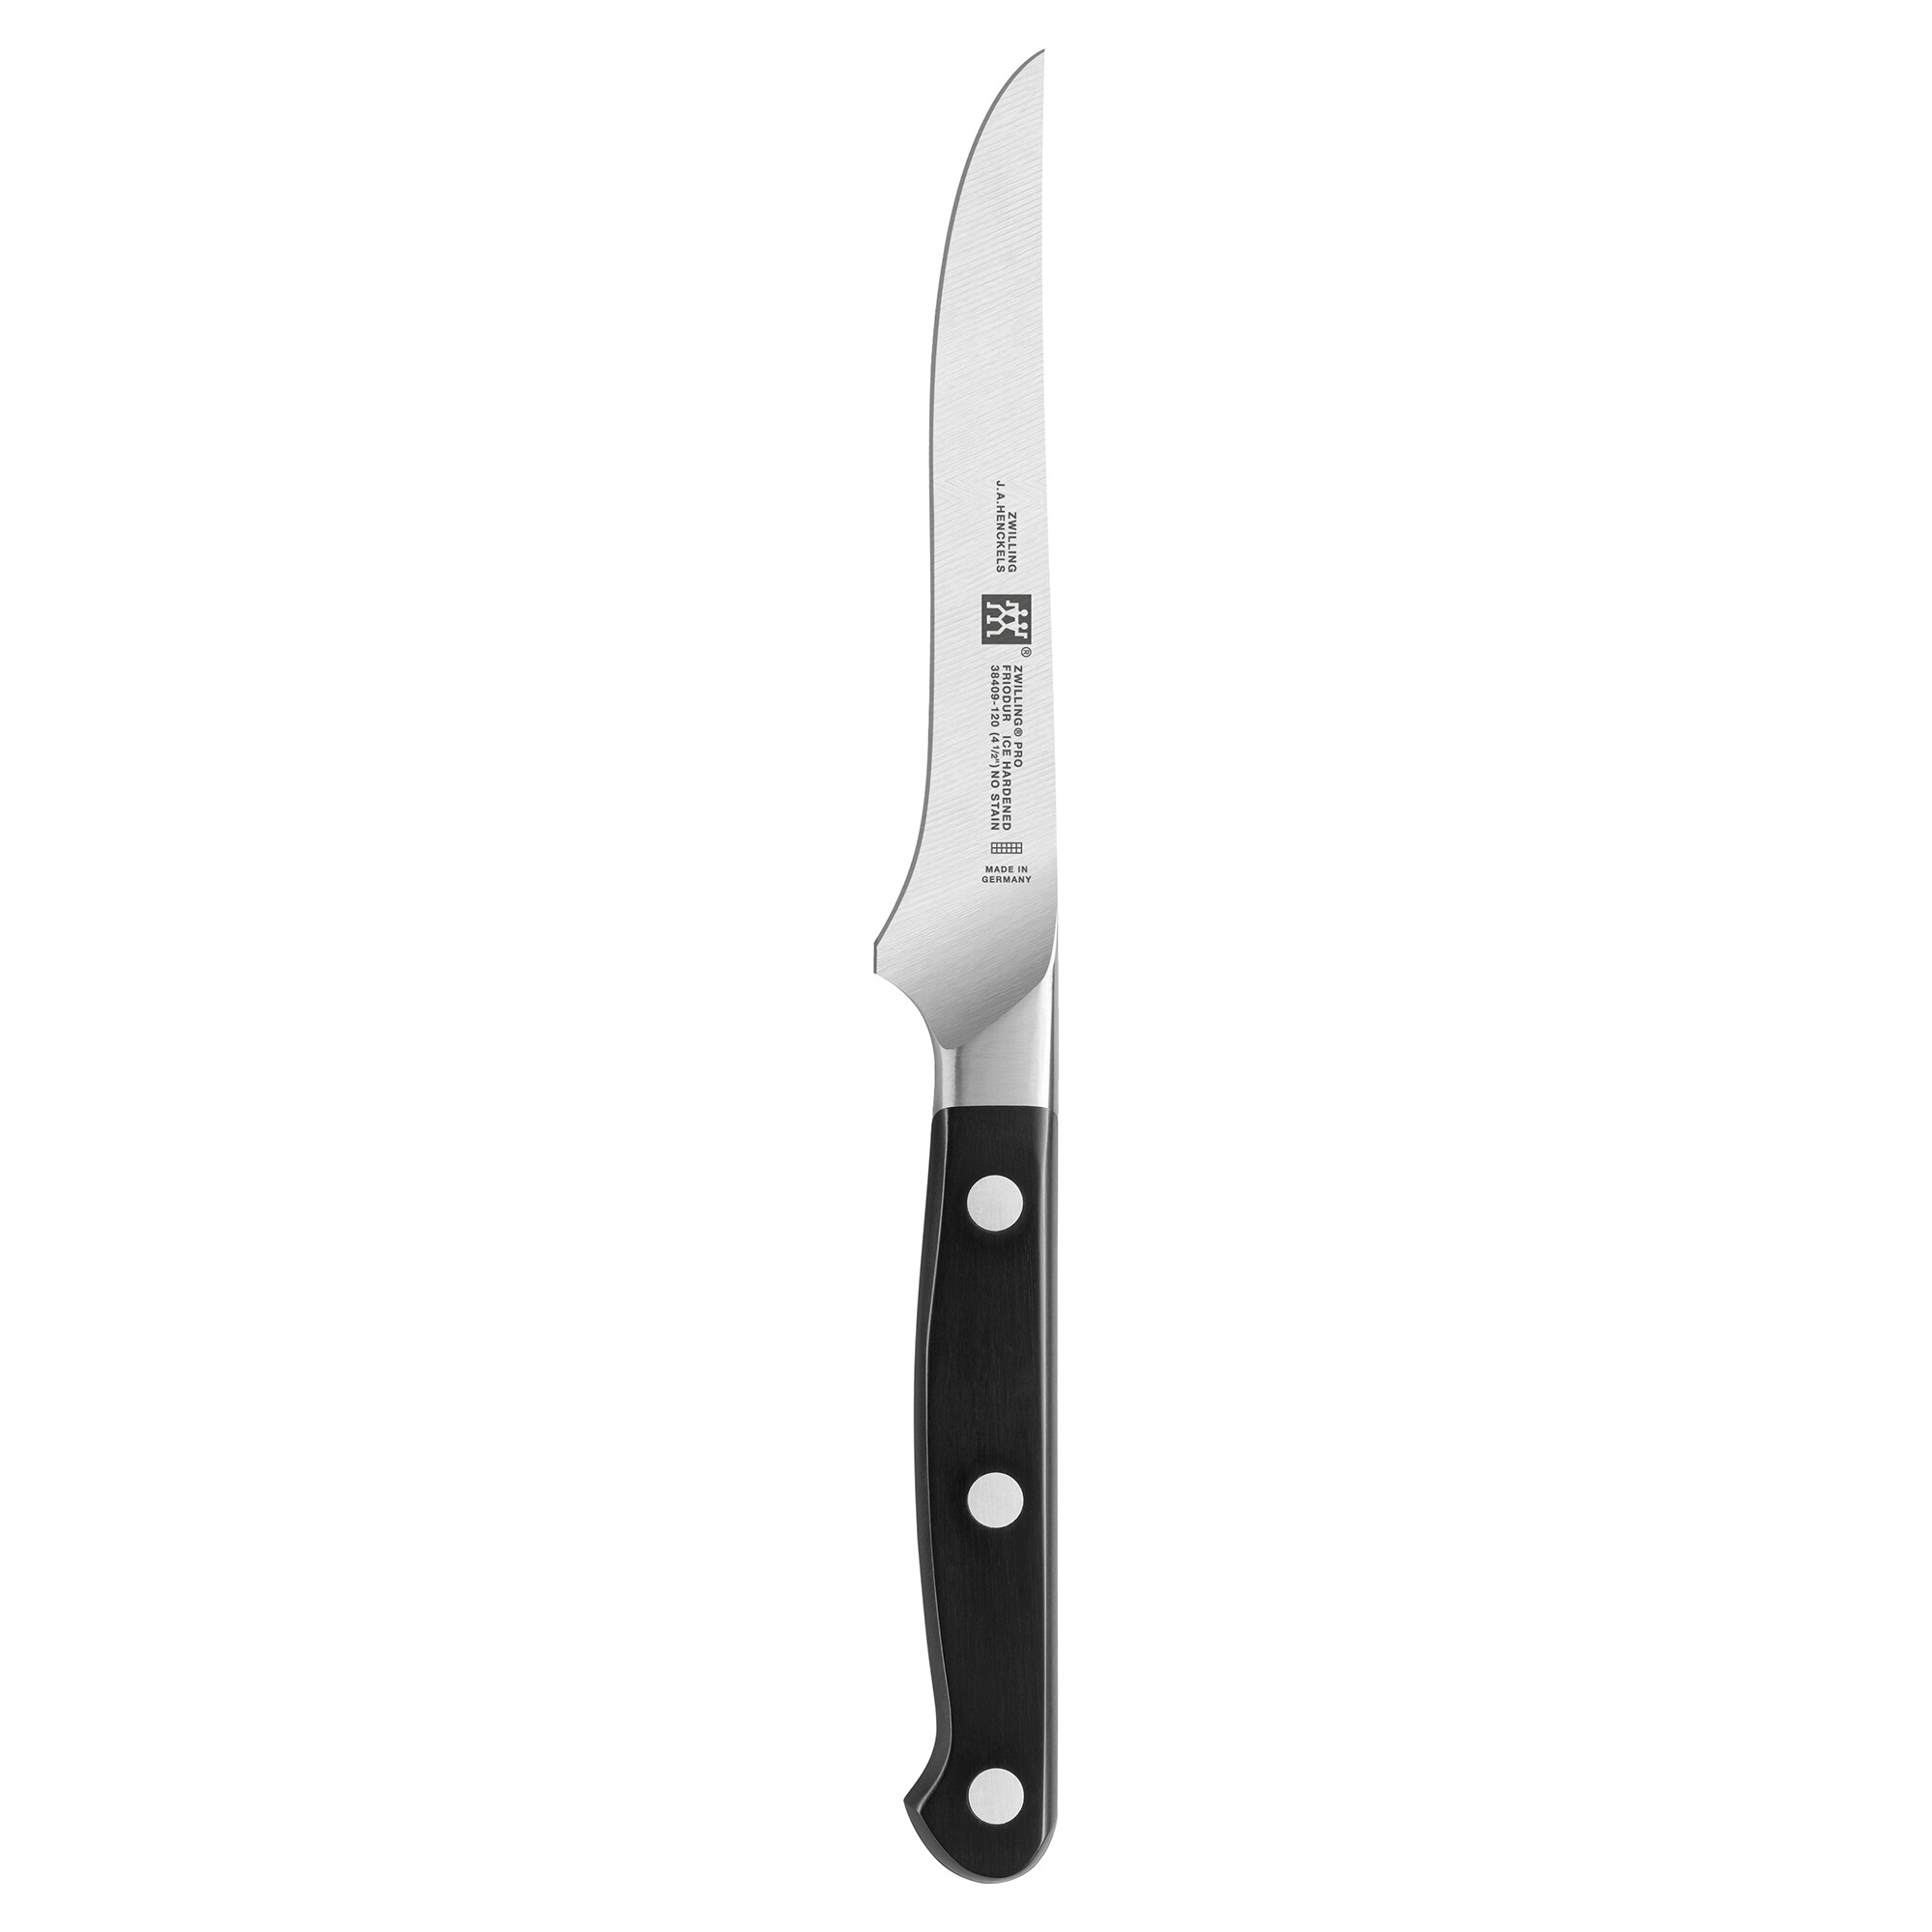 https://ak1.ostkcdn.com/images/products/is/images/direct/311a8d0099f64db35b875a2464f778d8fcd7490c/ZWILLING-Pro-4.5%22-Steak-Knife.jpg